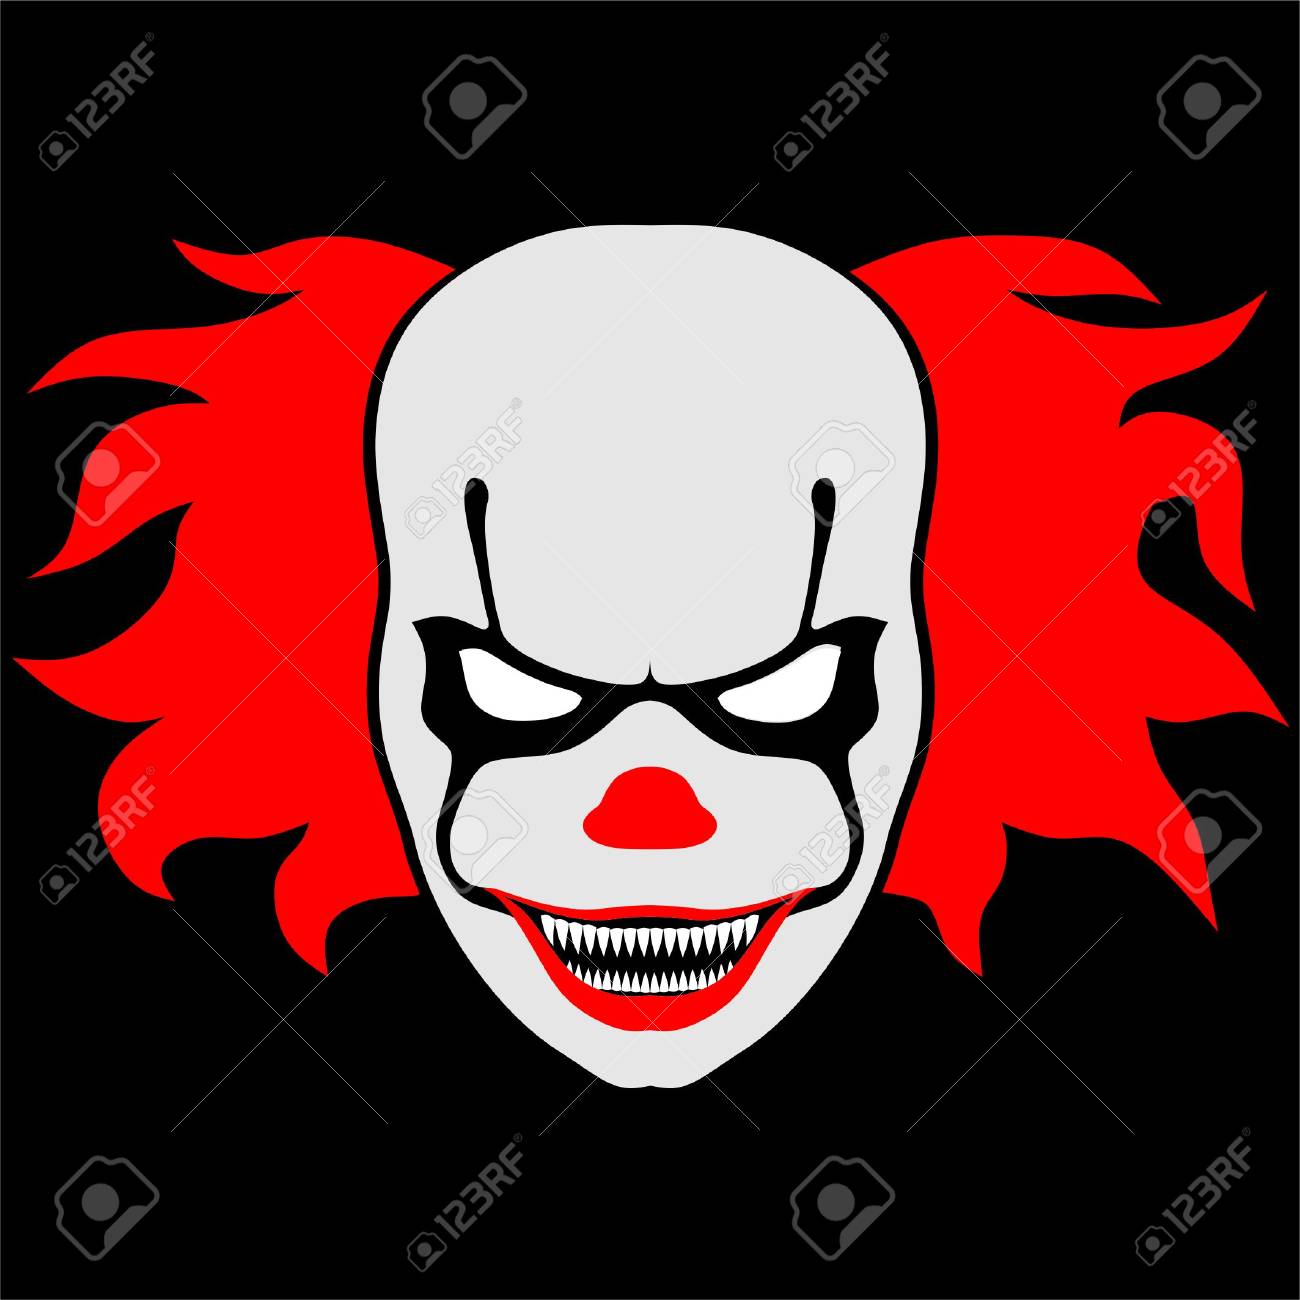 Bald scary Clown with smiling Face.